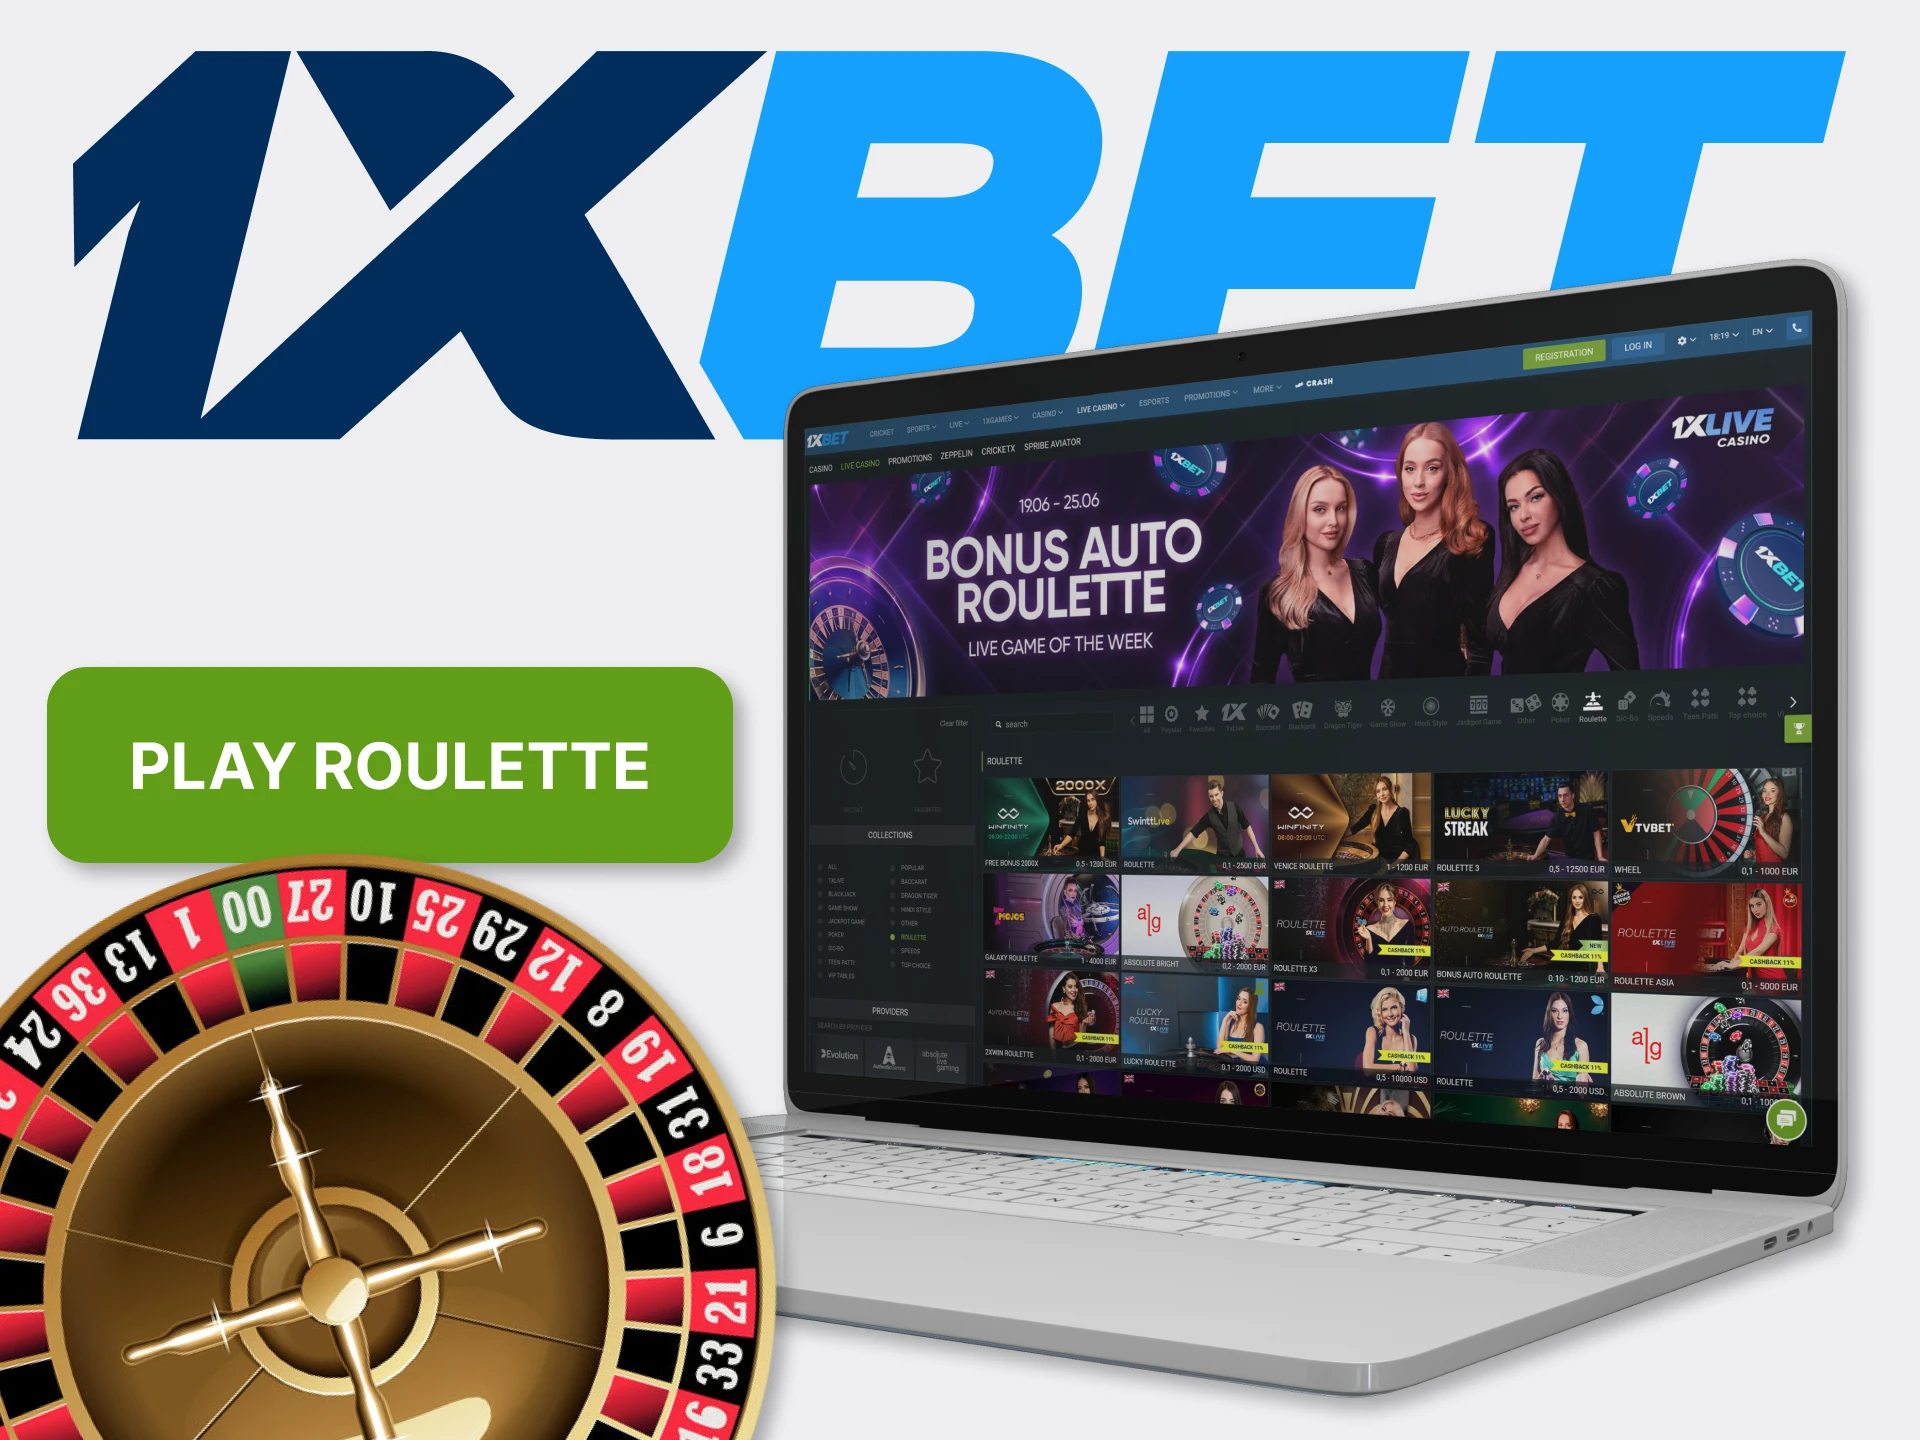 With 1xBet, play roulette and test your luck.